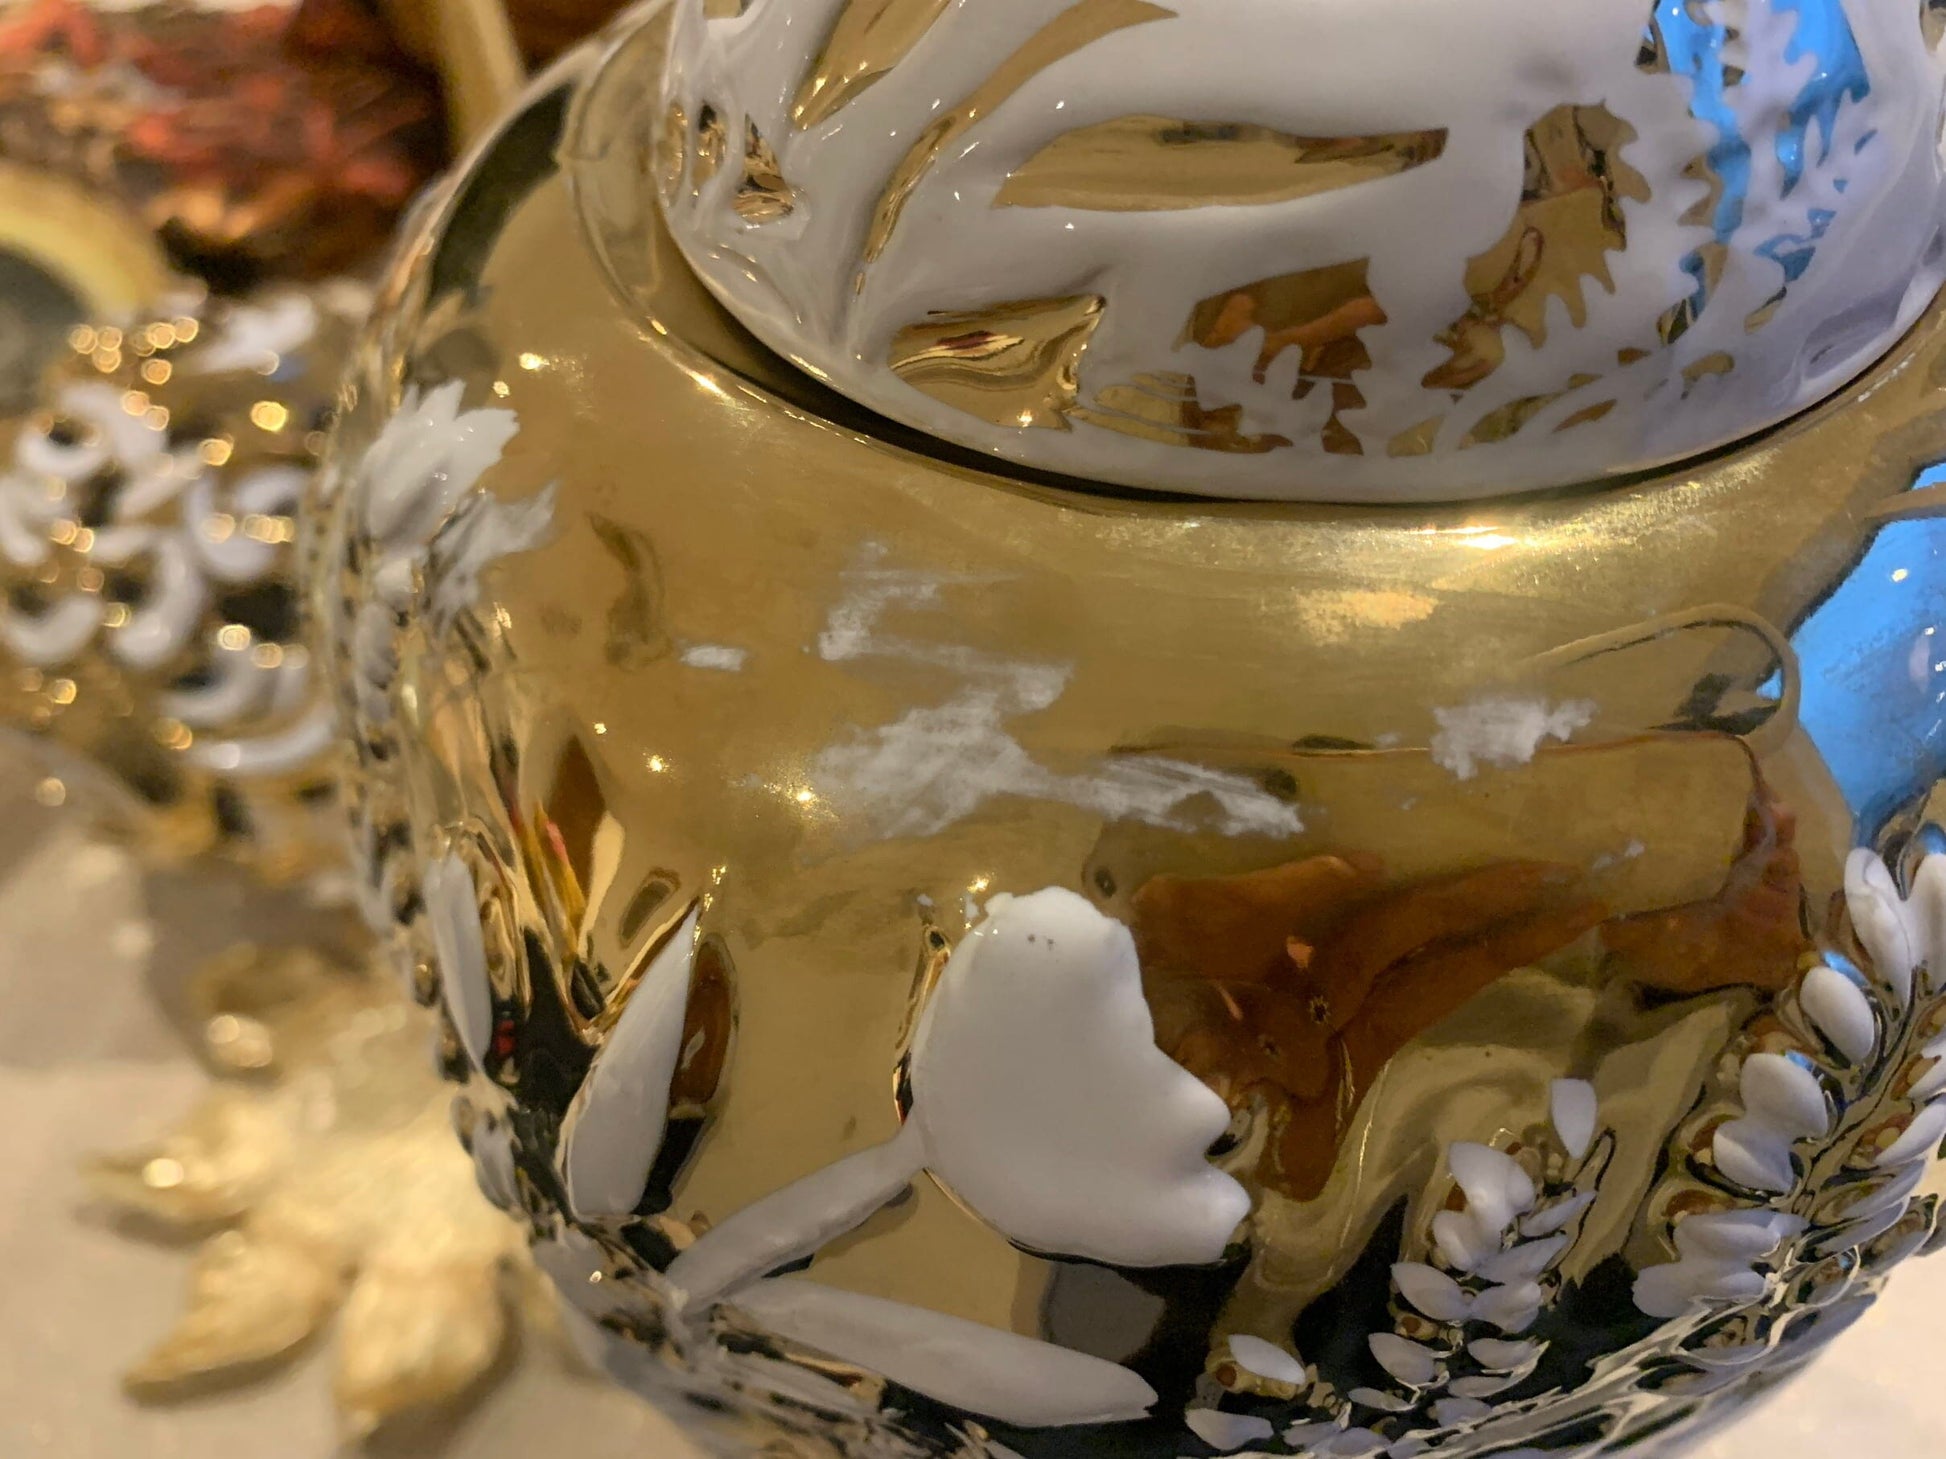 Ornate White and Gold Ginger Jar (with Imperfection) GingerJar High Class Touch - Home Decor 